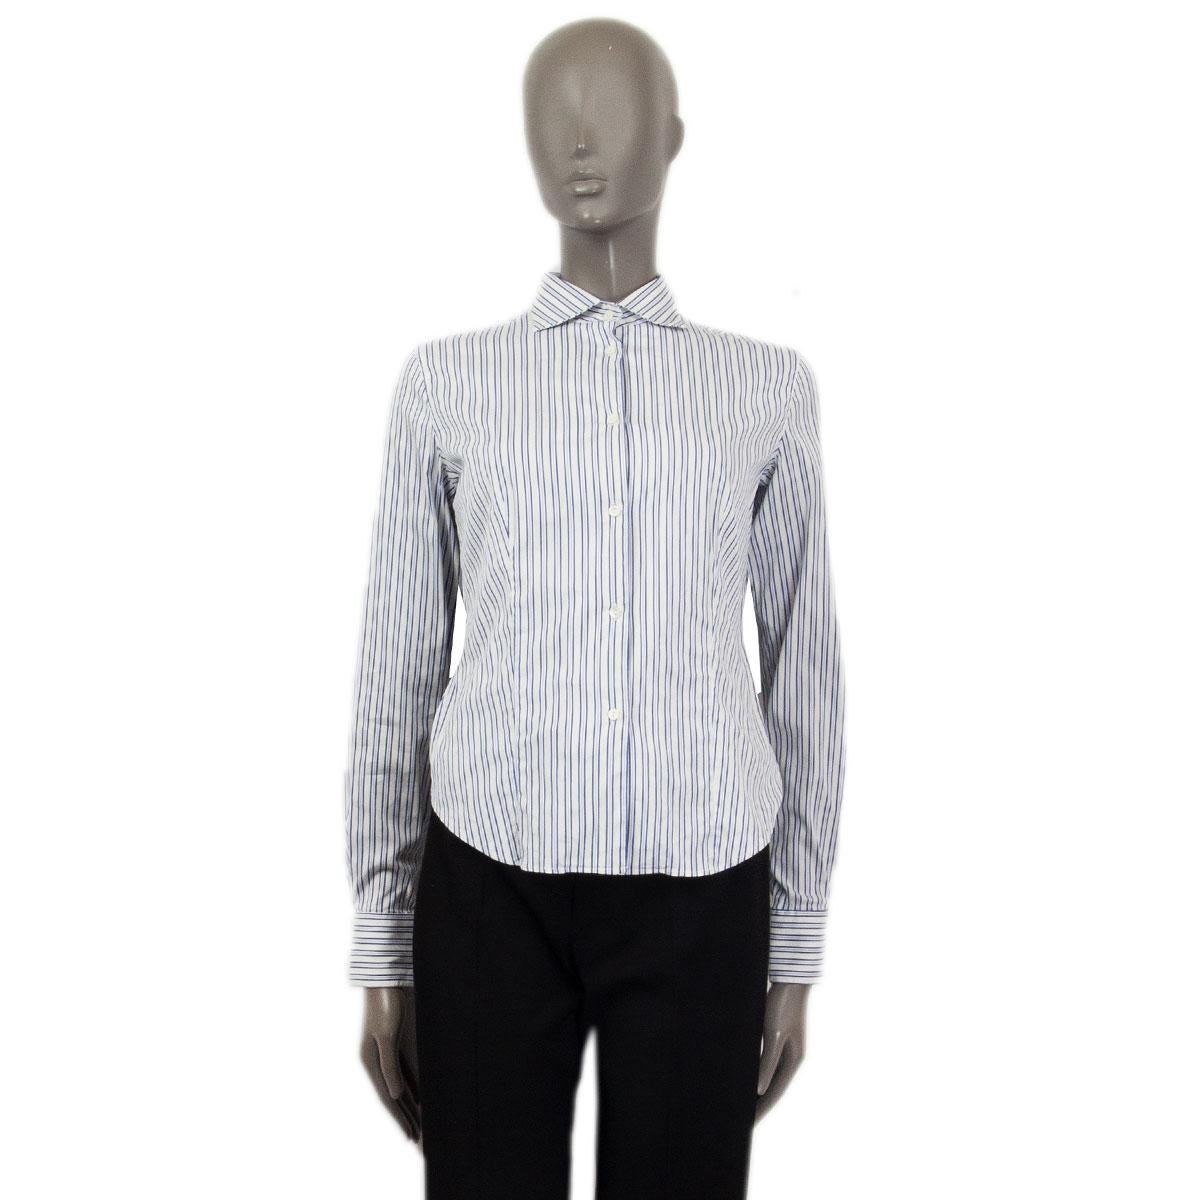 100% authentic Loro Piana striped button-down shirt in blue&white cotton (75%), polyamide (21%) and elastane (4%) with buttoned sleeve-cuffs. Closes with six buttons on the front. Unlined. Has been worn and is in excellent